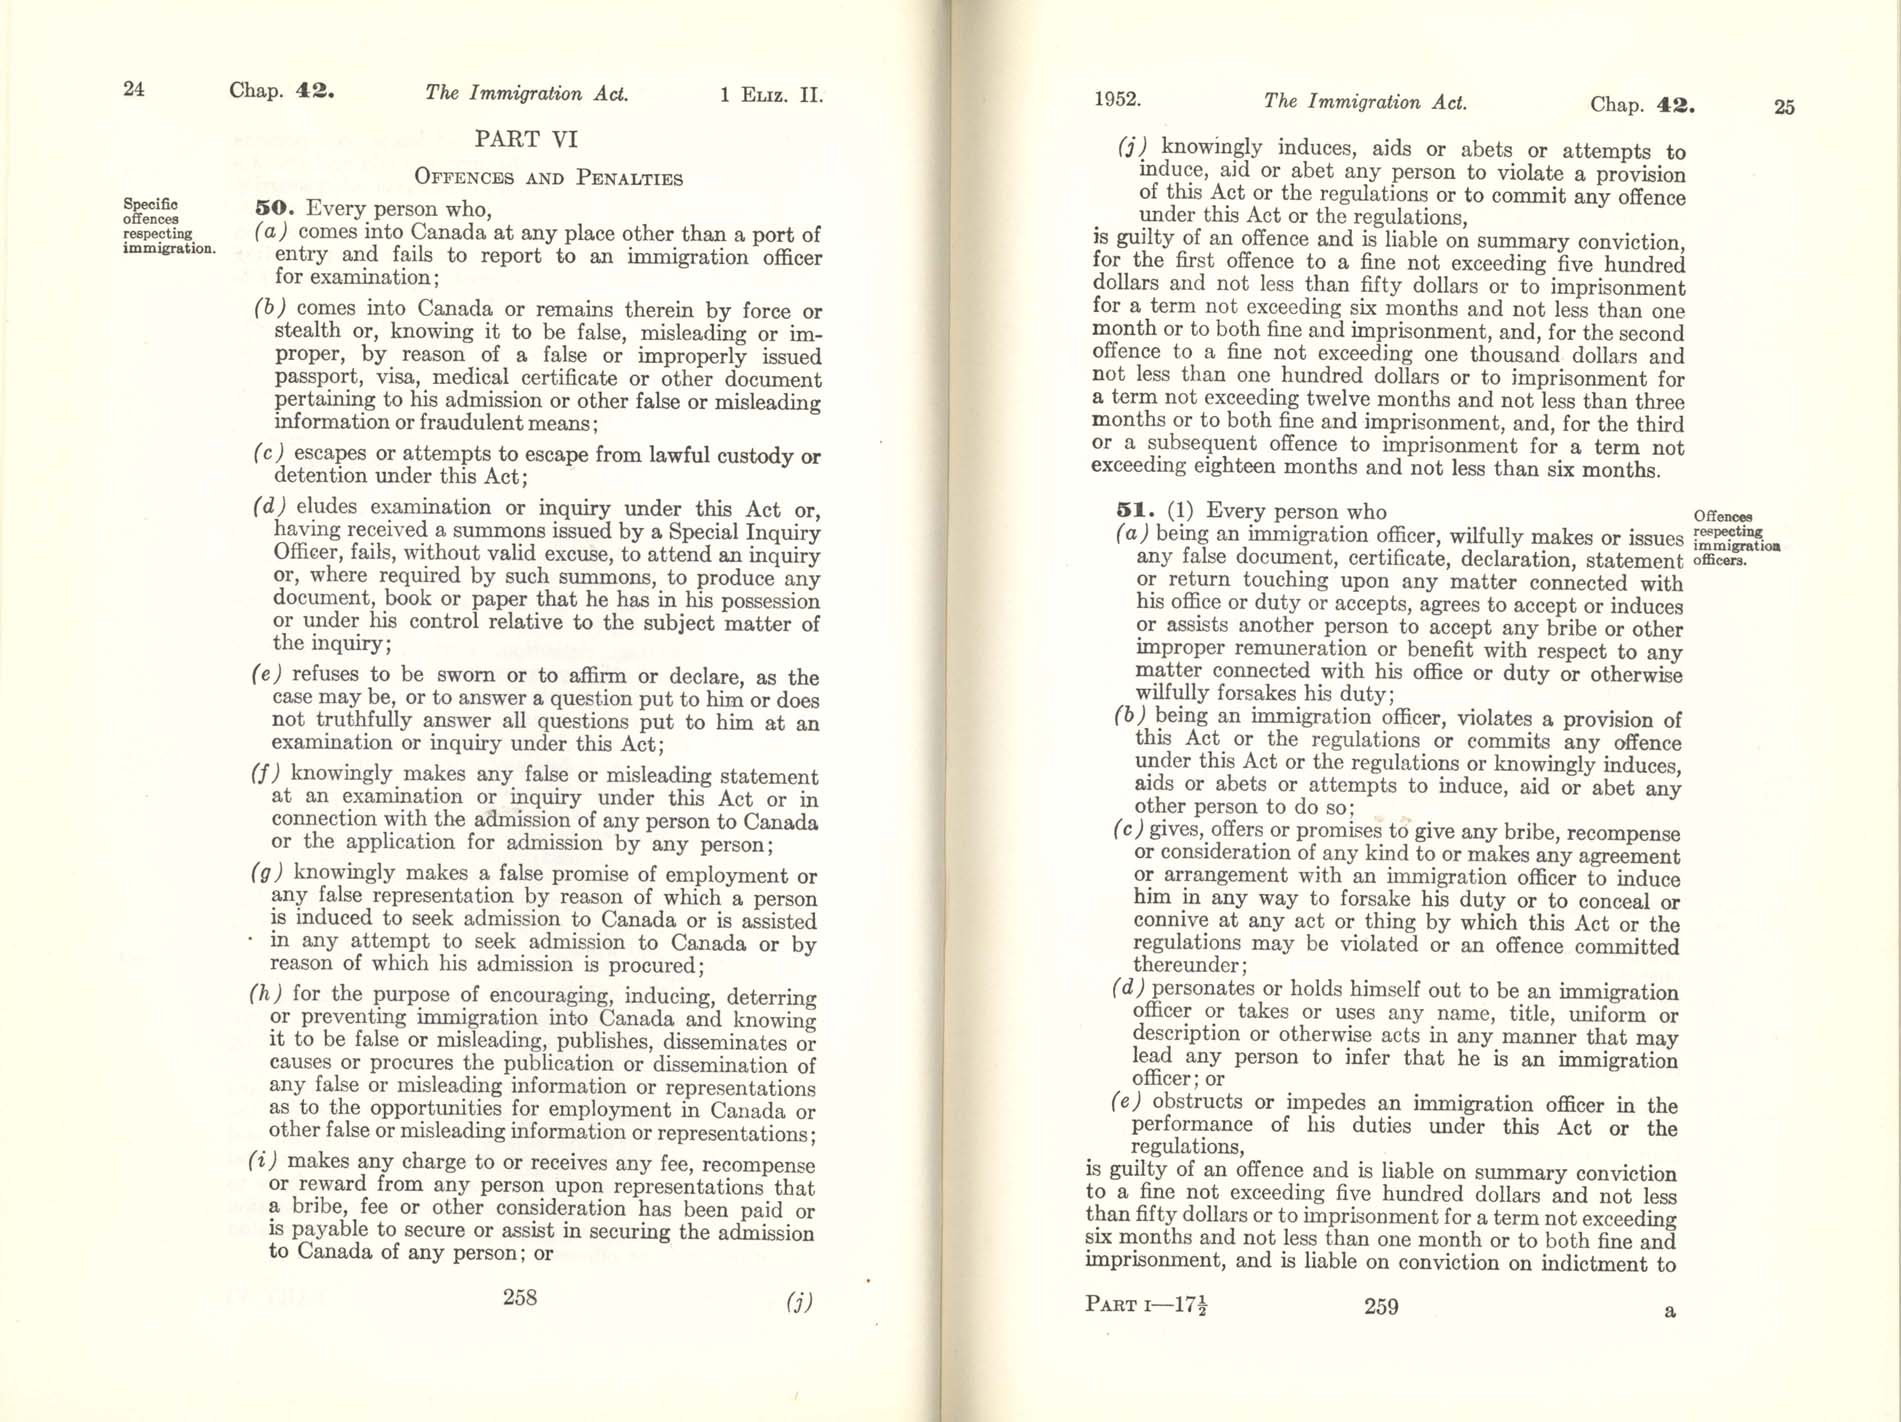 CHAP 42 Page 258, 259 Immigration Act, 1952